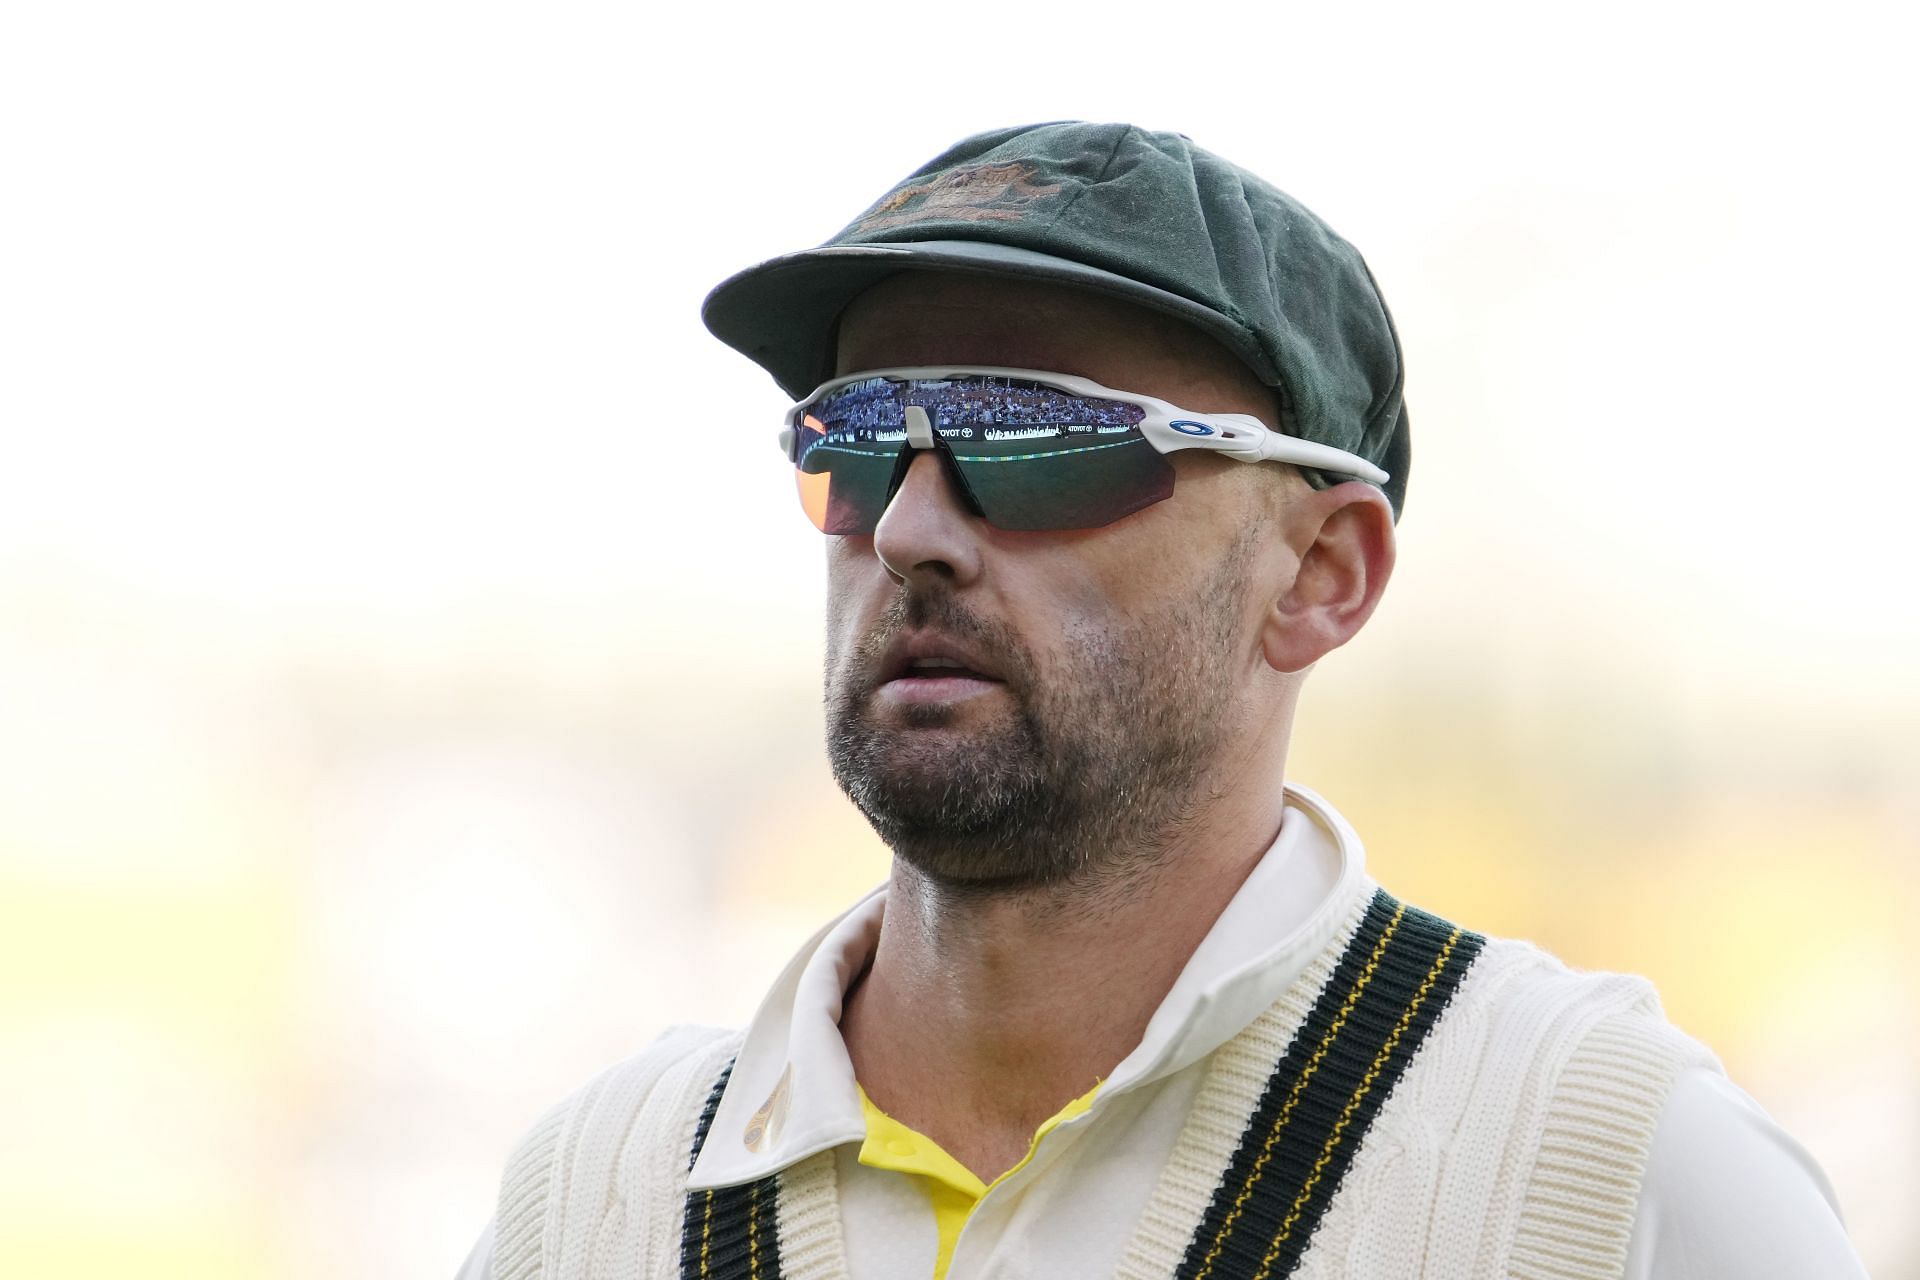 Nathan Lyon has been hit for more sixes than any other bowler in Test cricket.